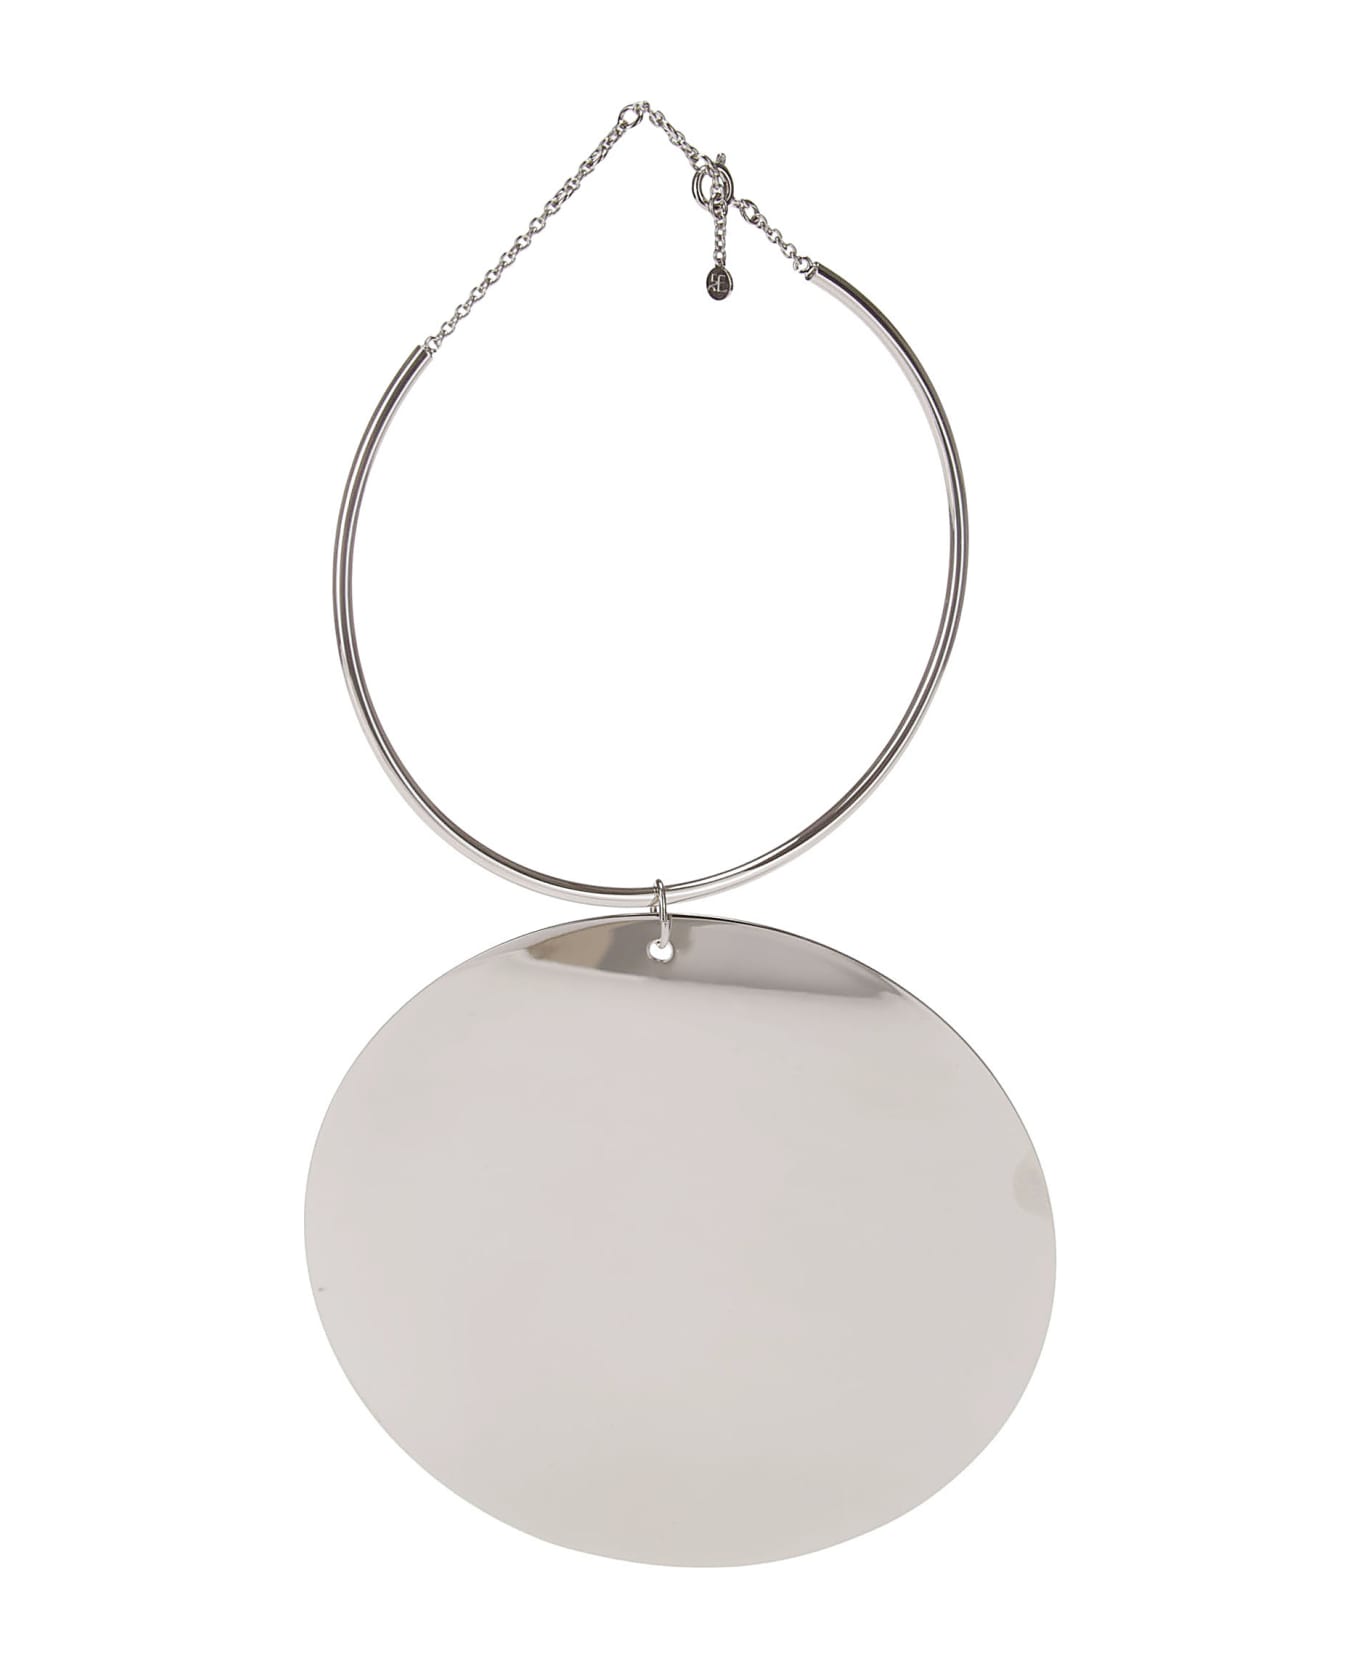 Courrèges Holistic Circle Lacquered Necklace - SILVER ネックレス